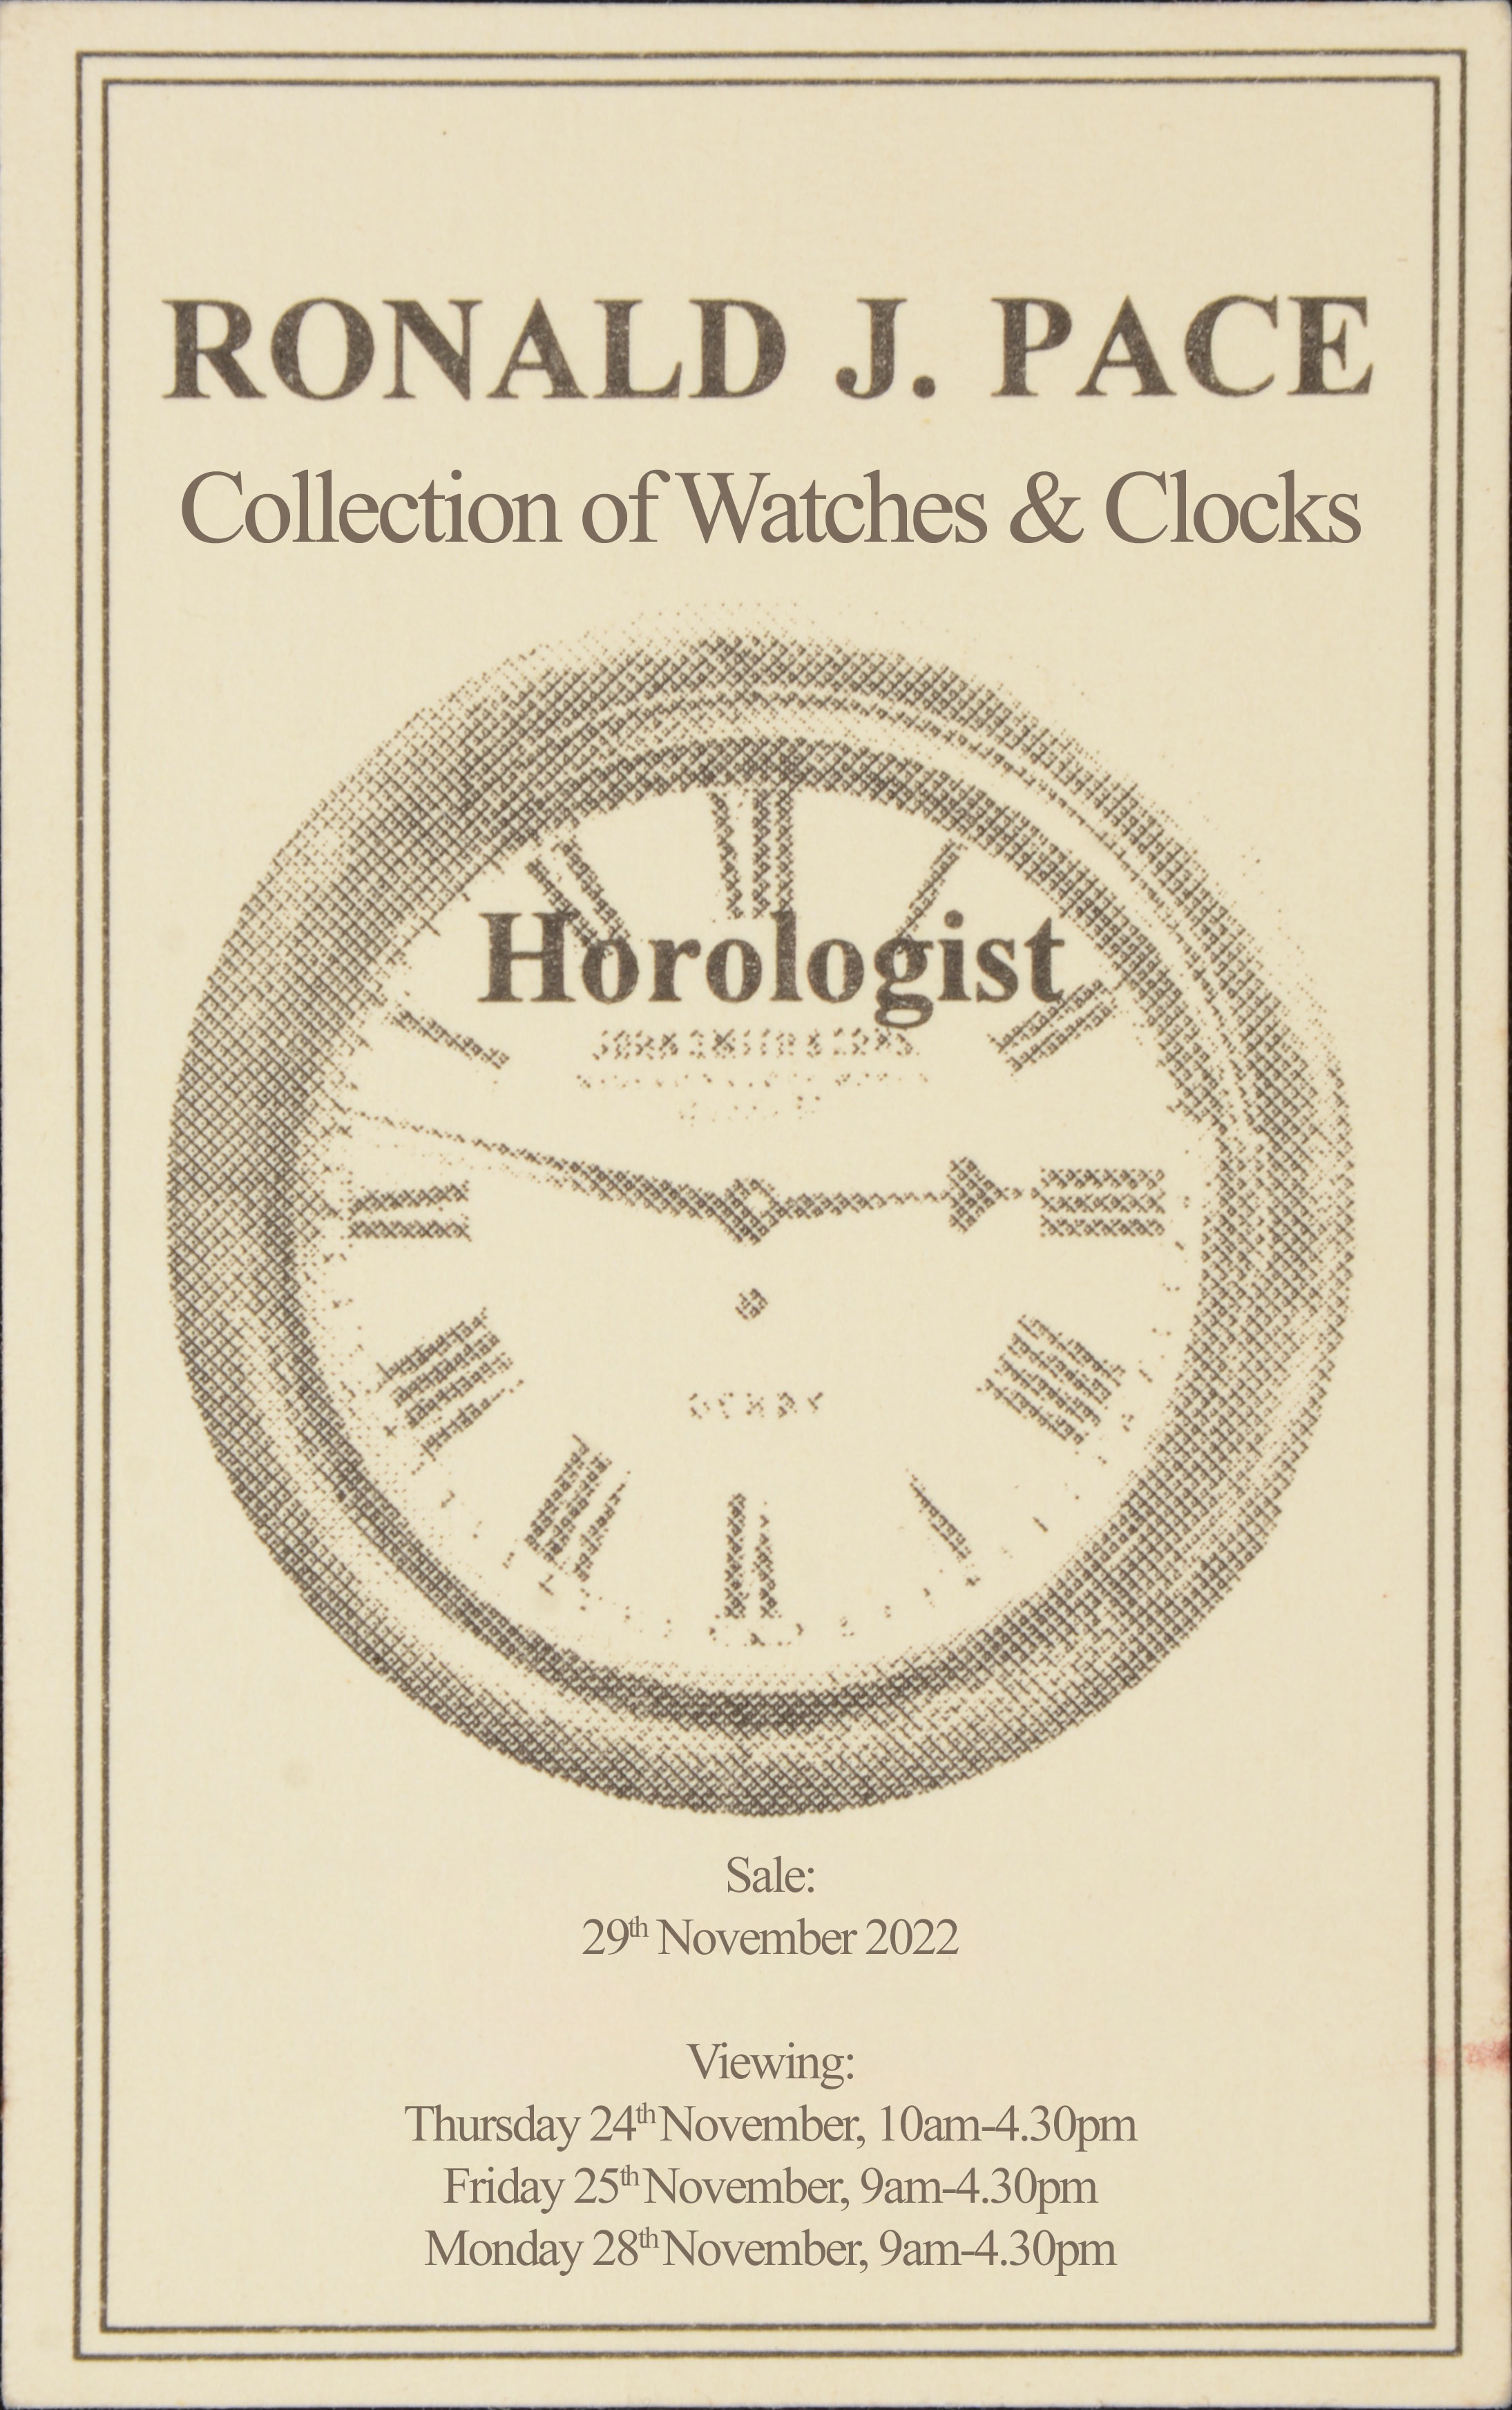 The Ronald J Pace Collection of Watches and Clocks